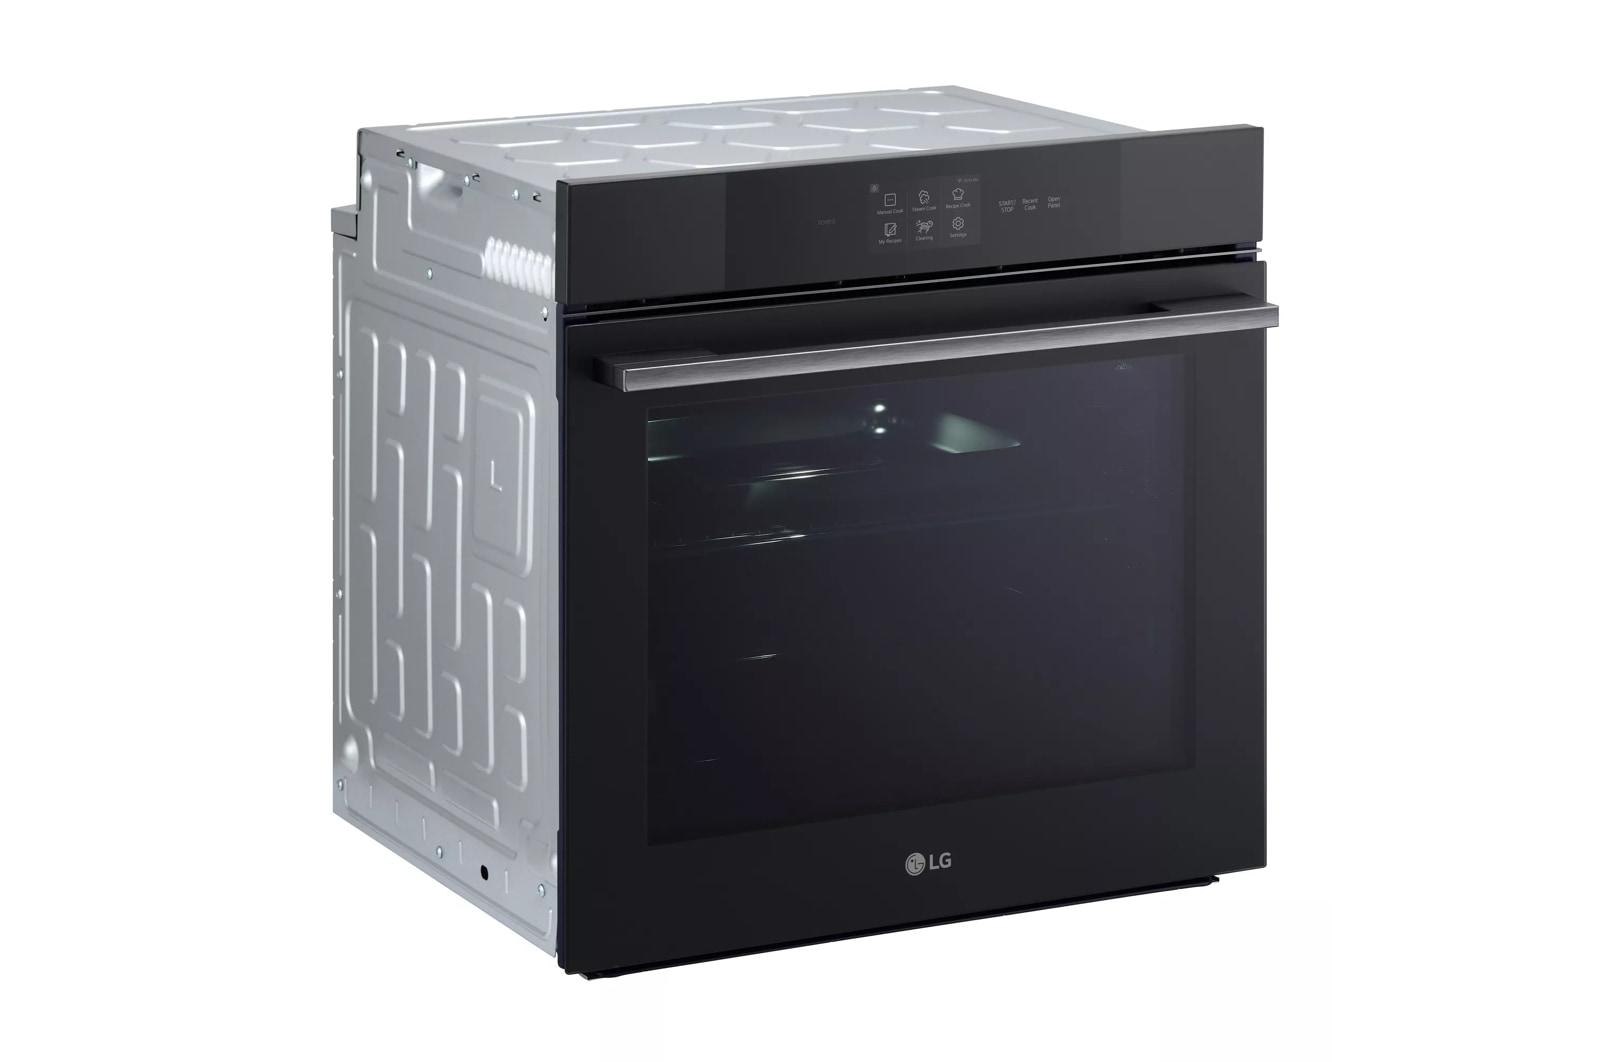 Lg 3.0 cu. ft. Smart Compact Wall Oven with Instaview®, Convection, Air Fry and Steam Baking